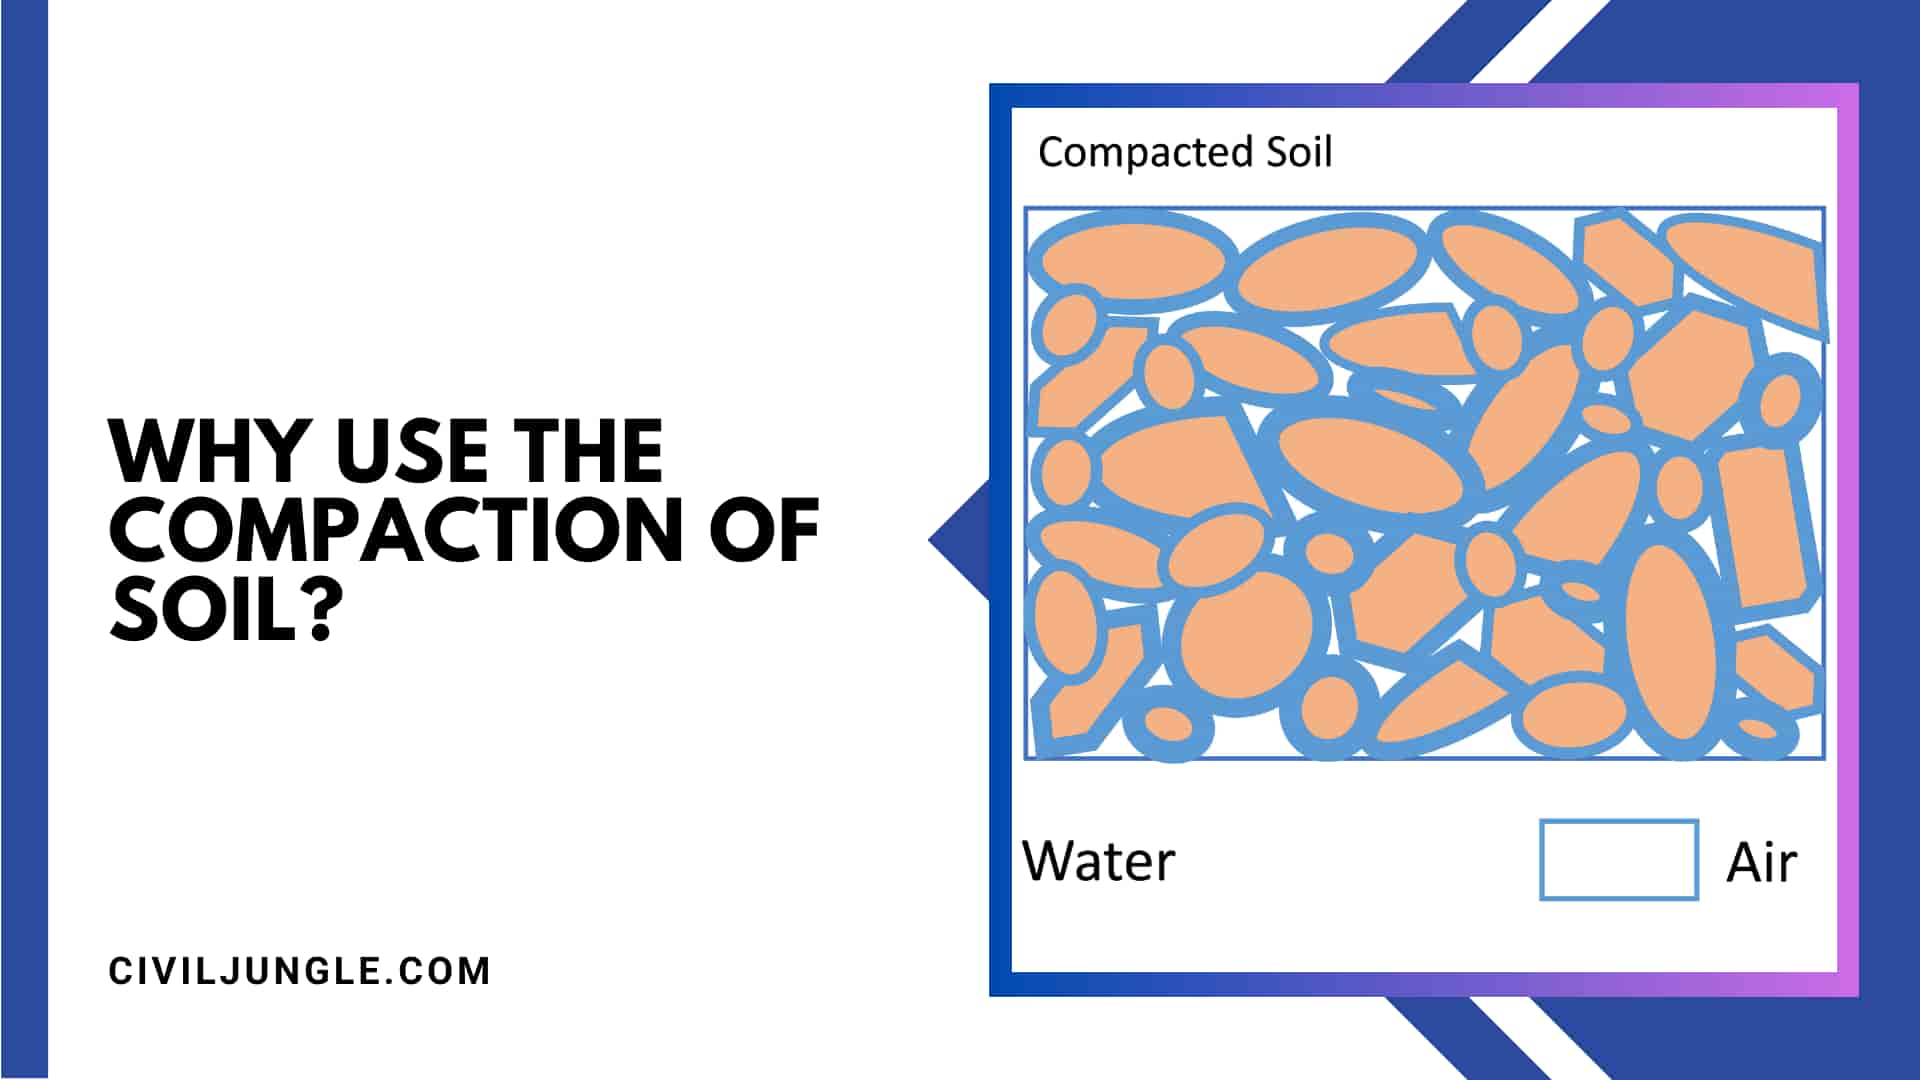 Why Use the Compaction of Soil?